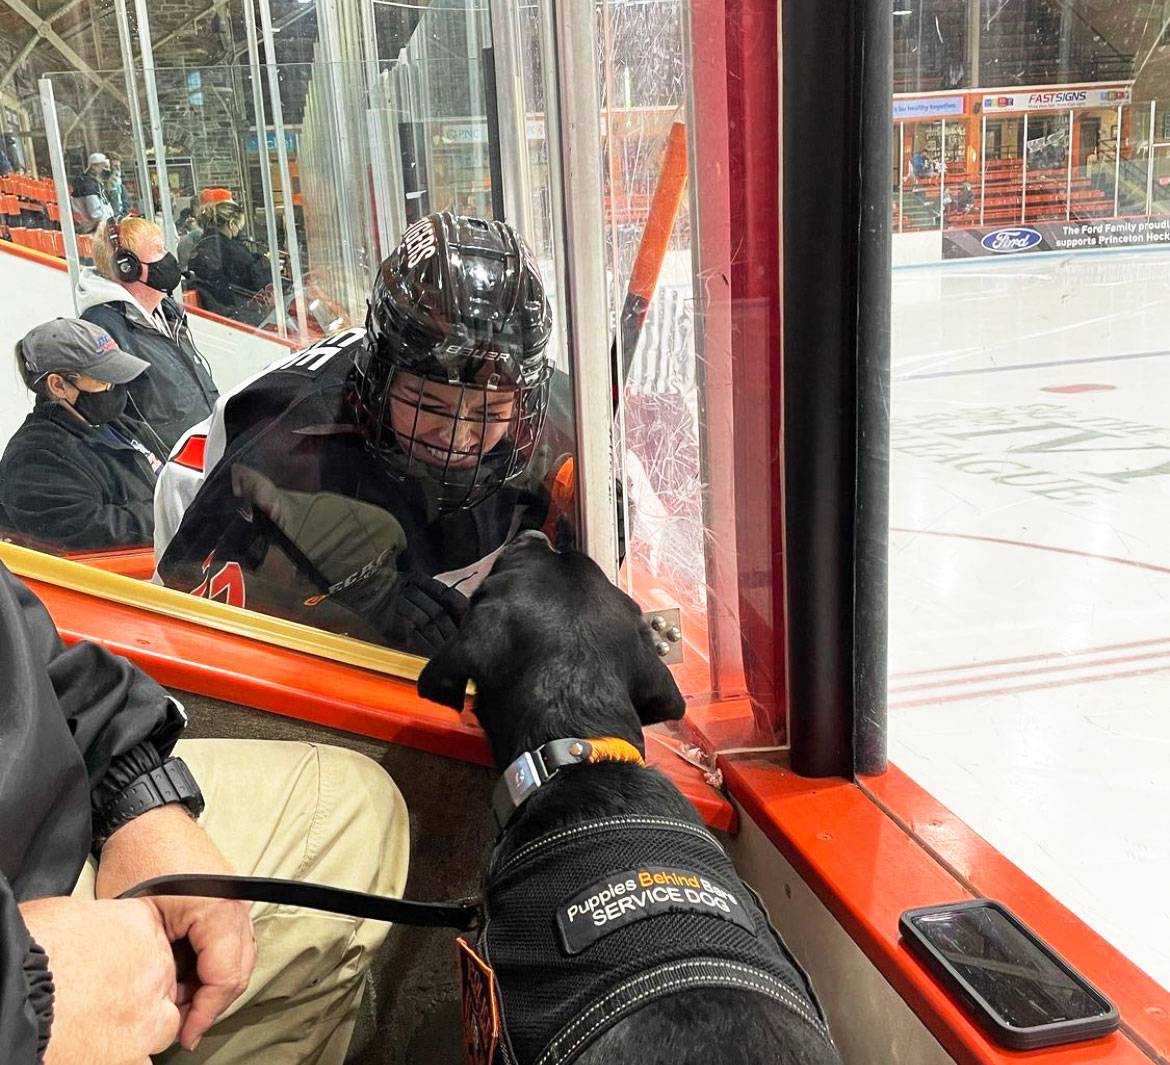 A member of the women's hockey team greets Coach through the glass